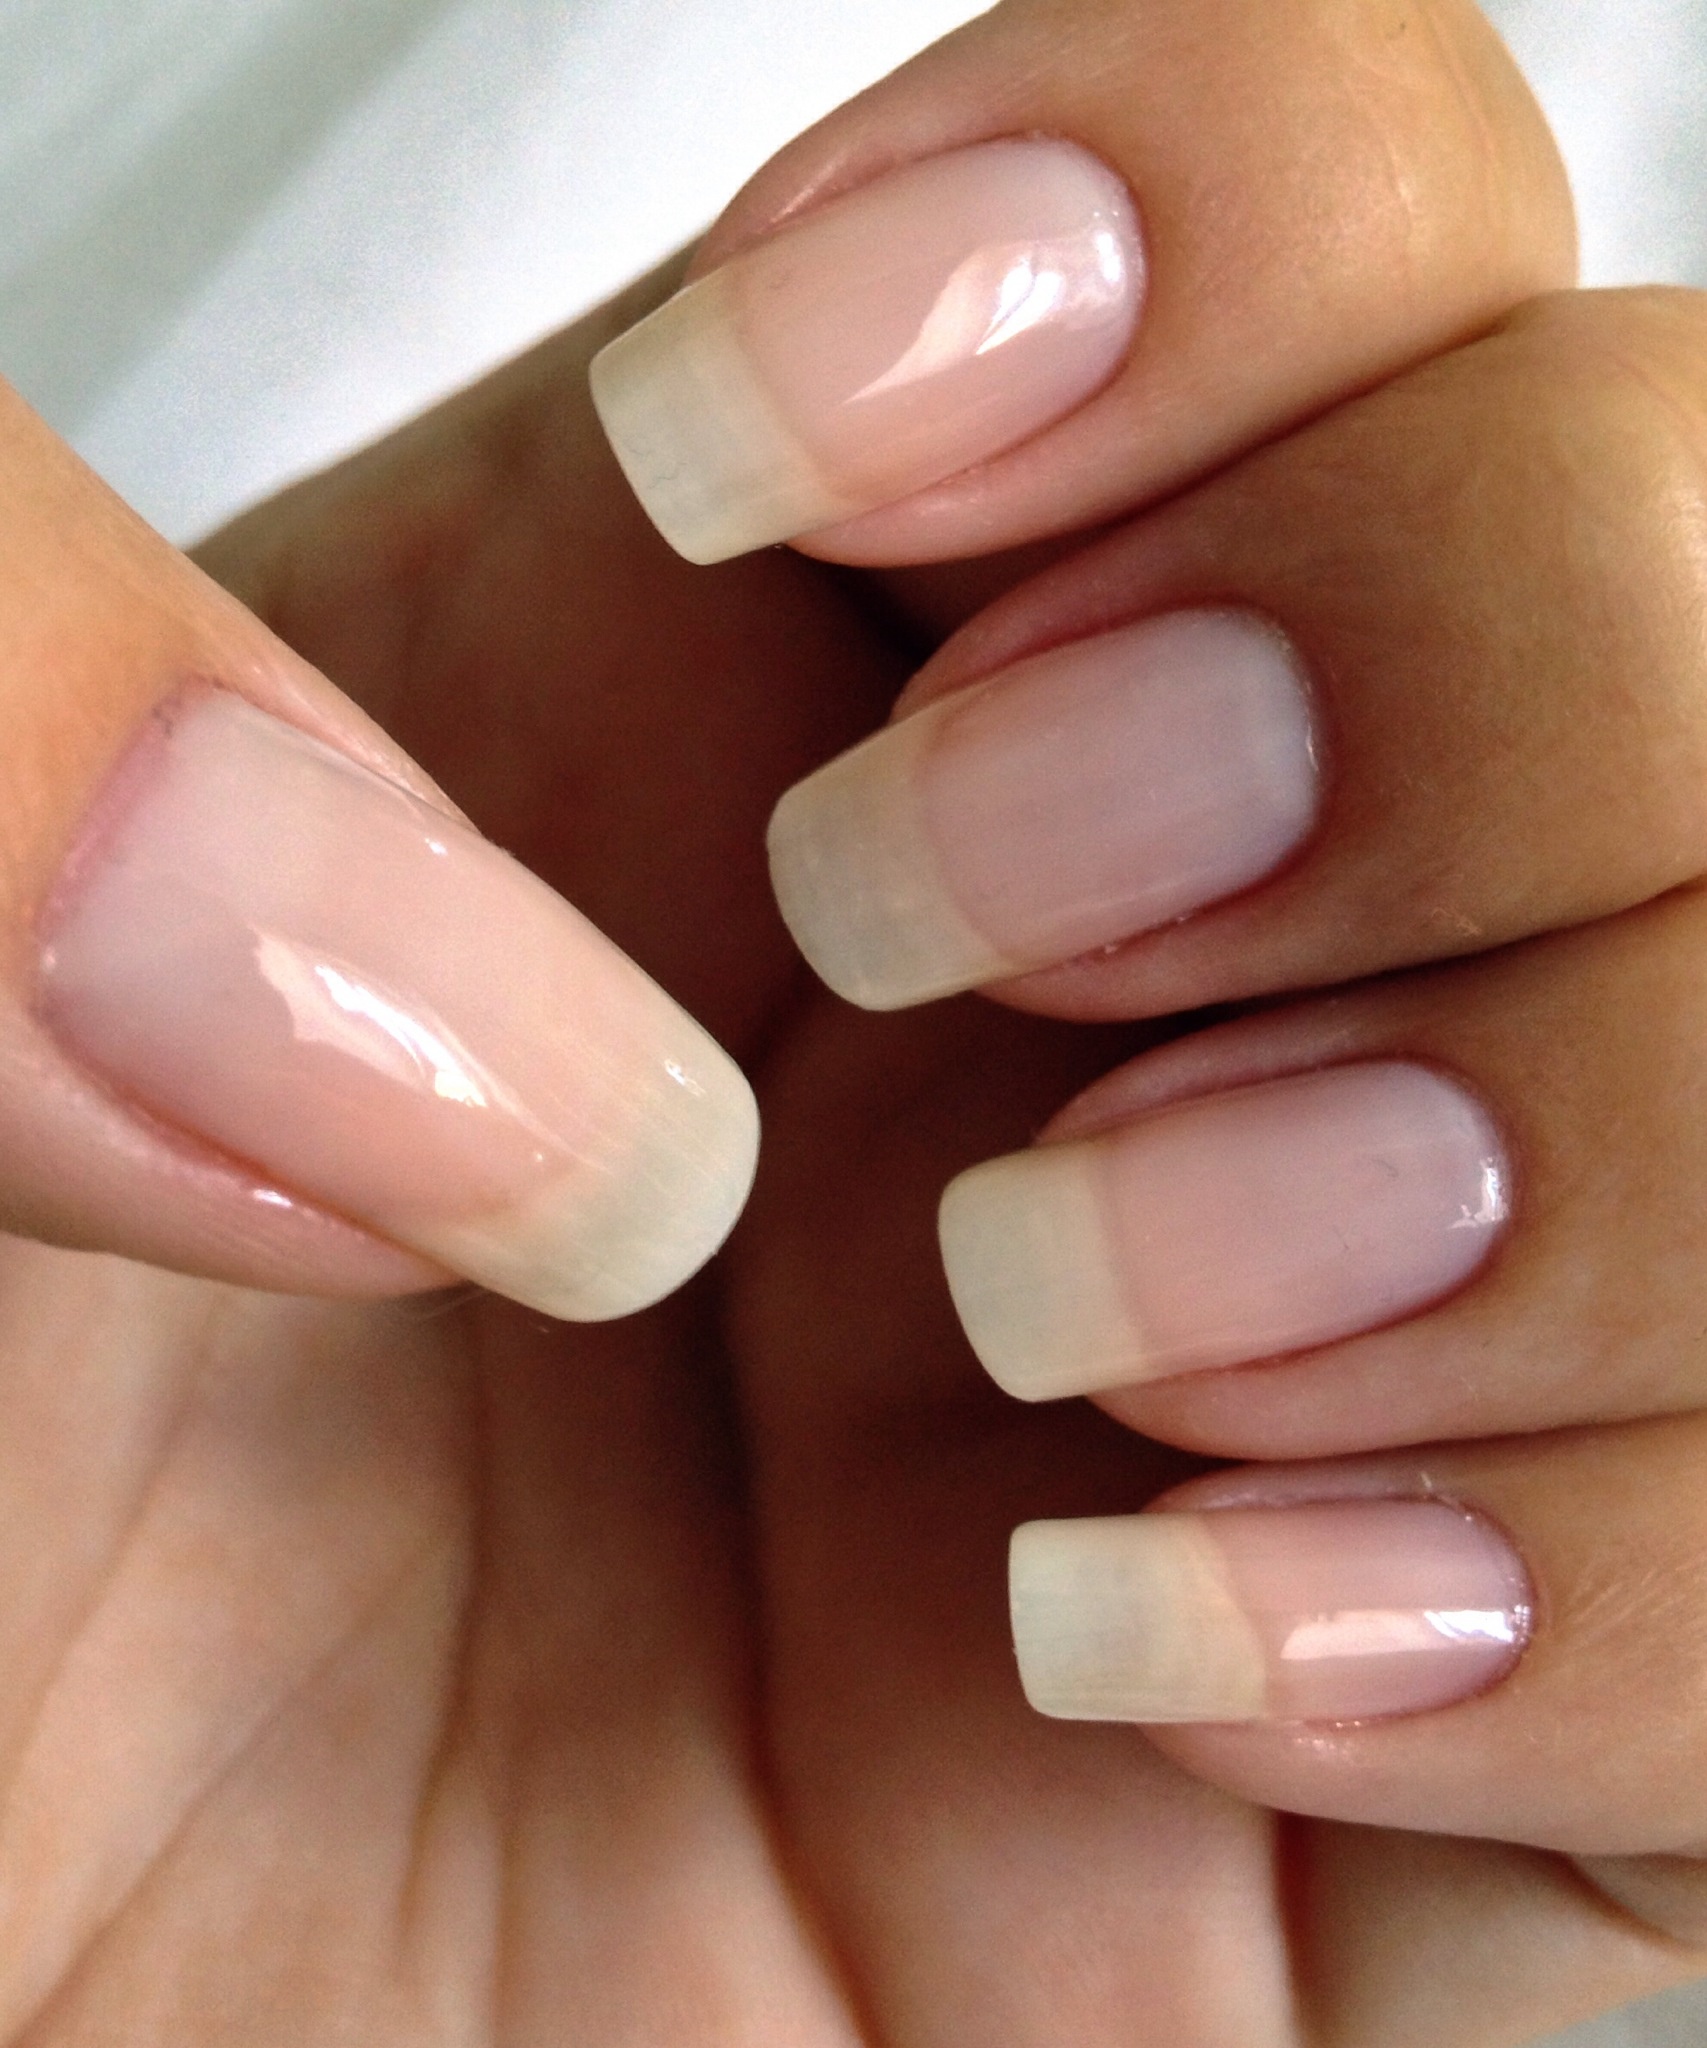 How to make your nails grow long & strong - B+C Guides